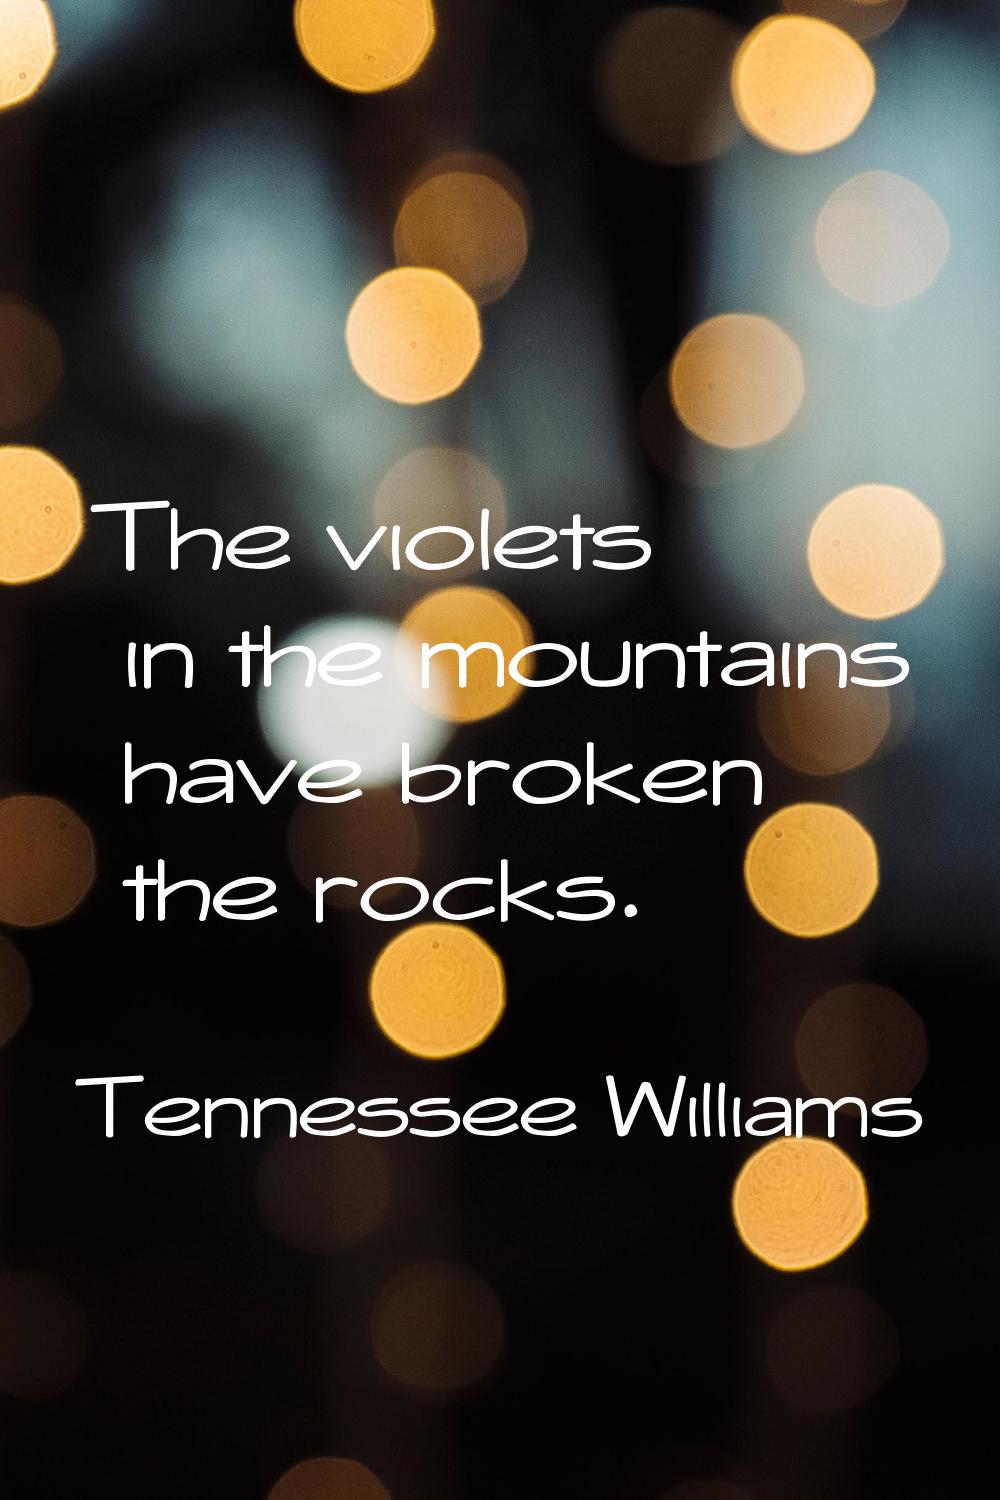 The violets in the mountains have broken the rocks.